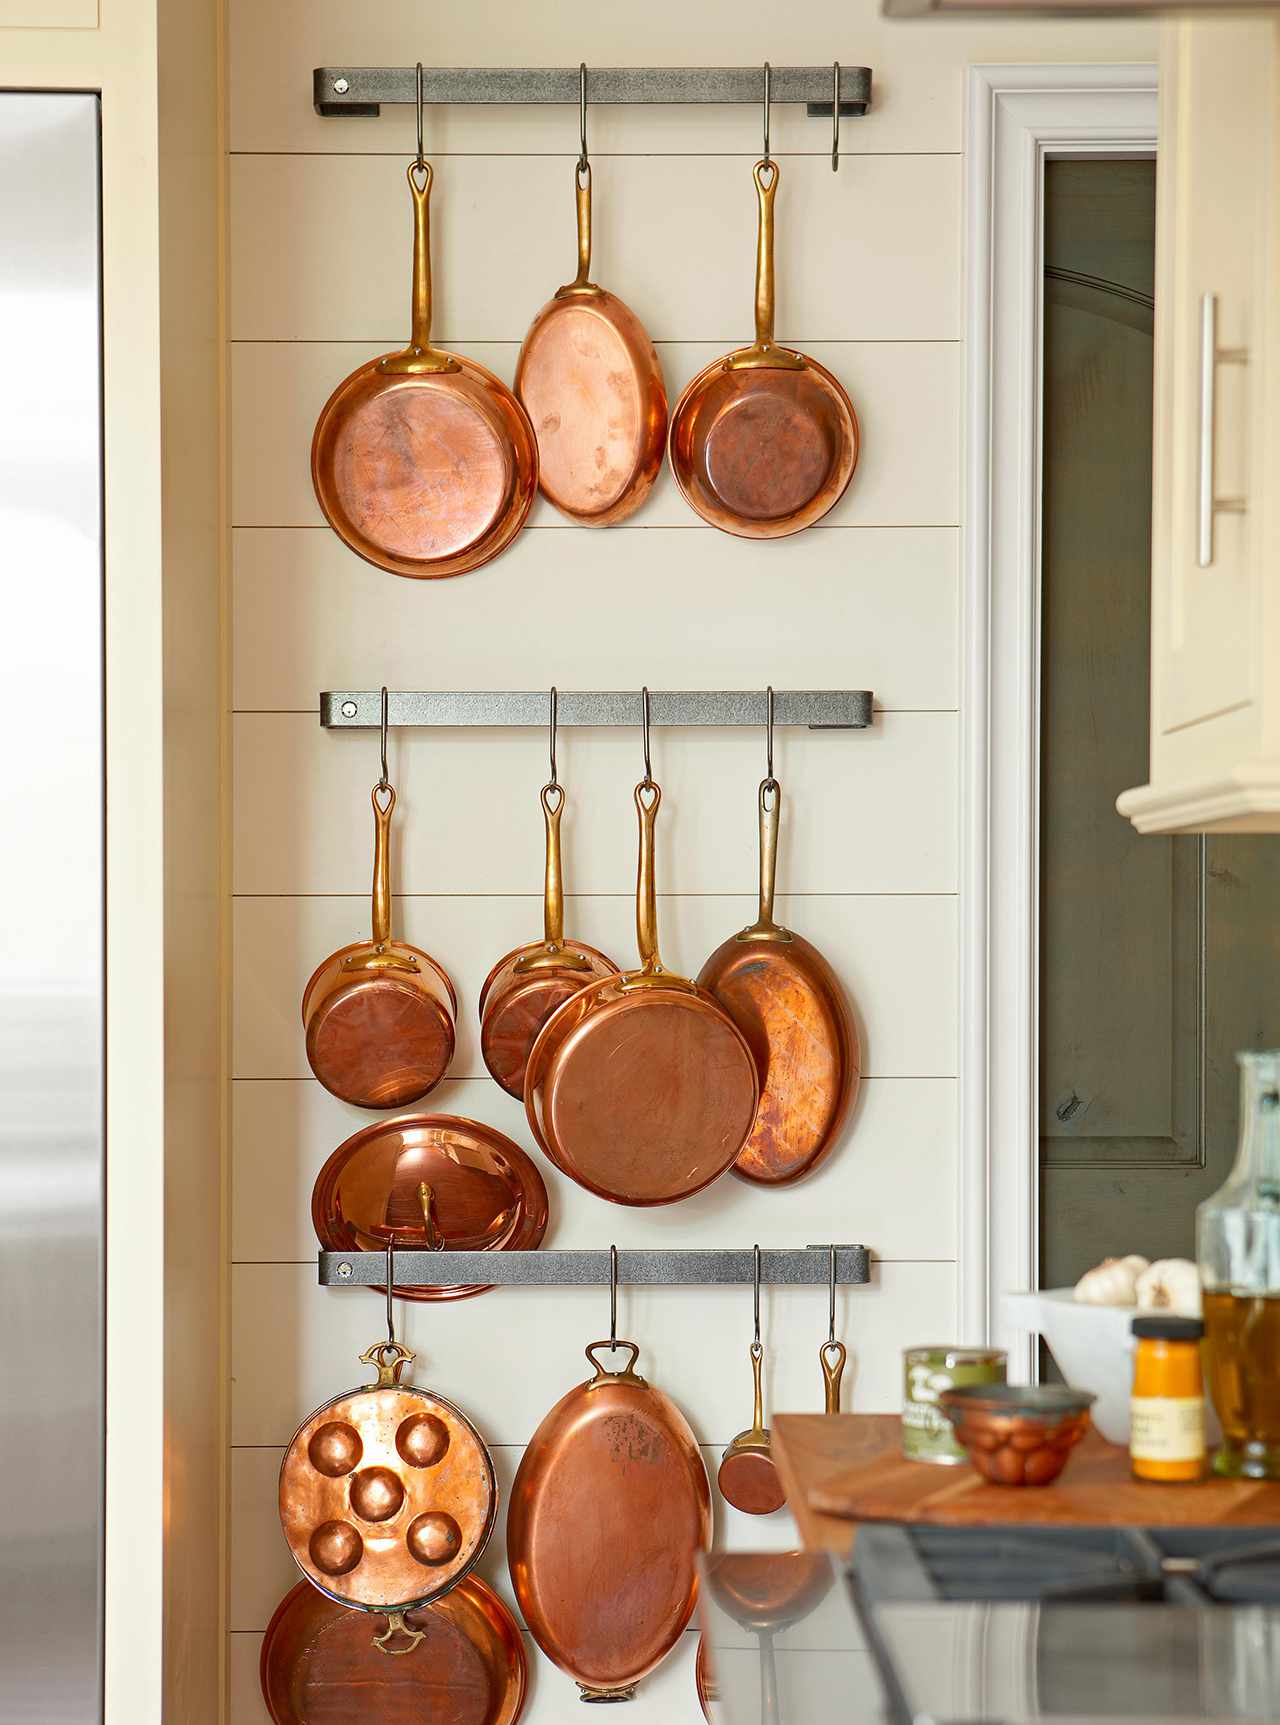 How to Clean Copper to Remove Tarnish and Restore Shine | Better Homes & Gardens